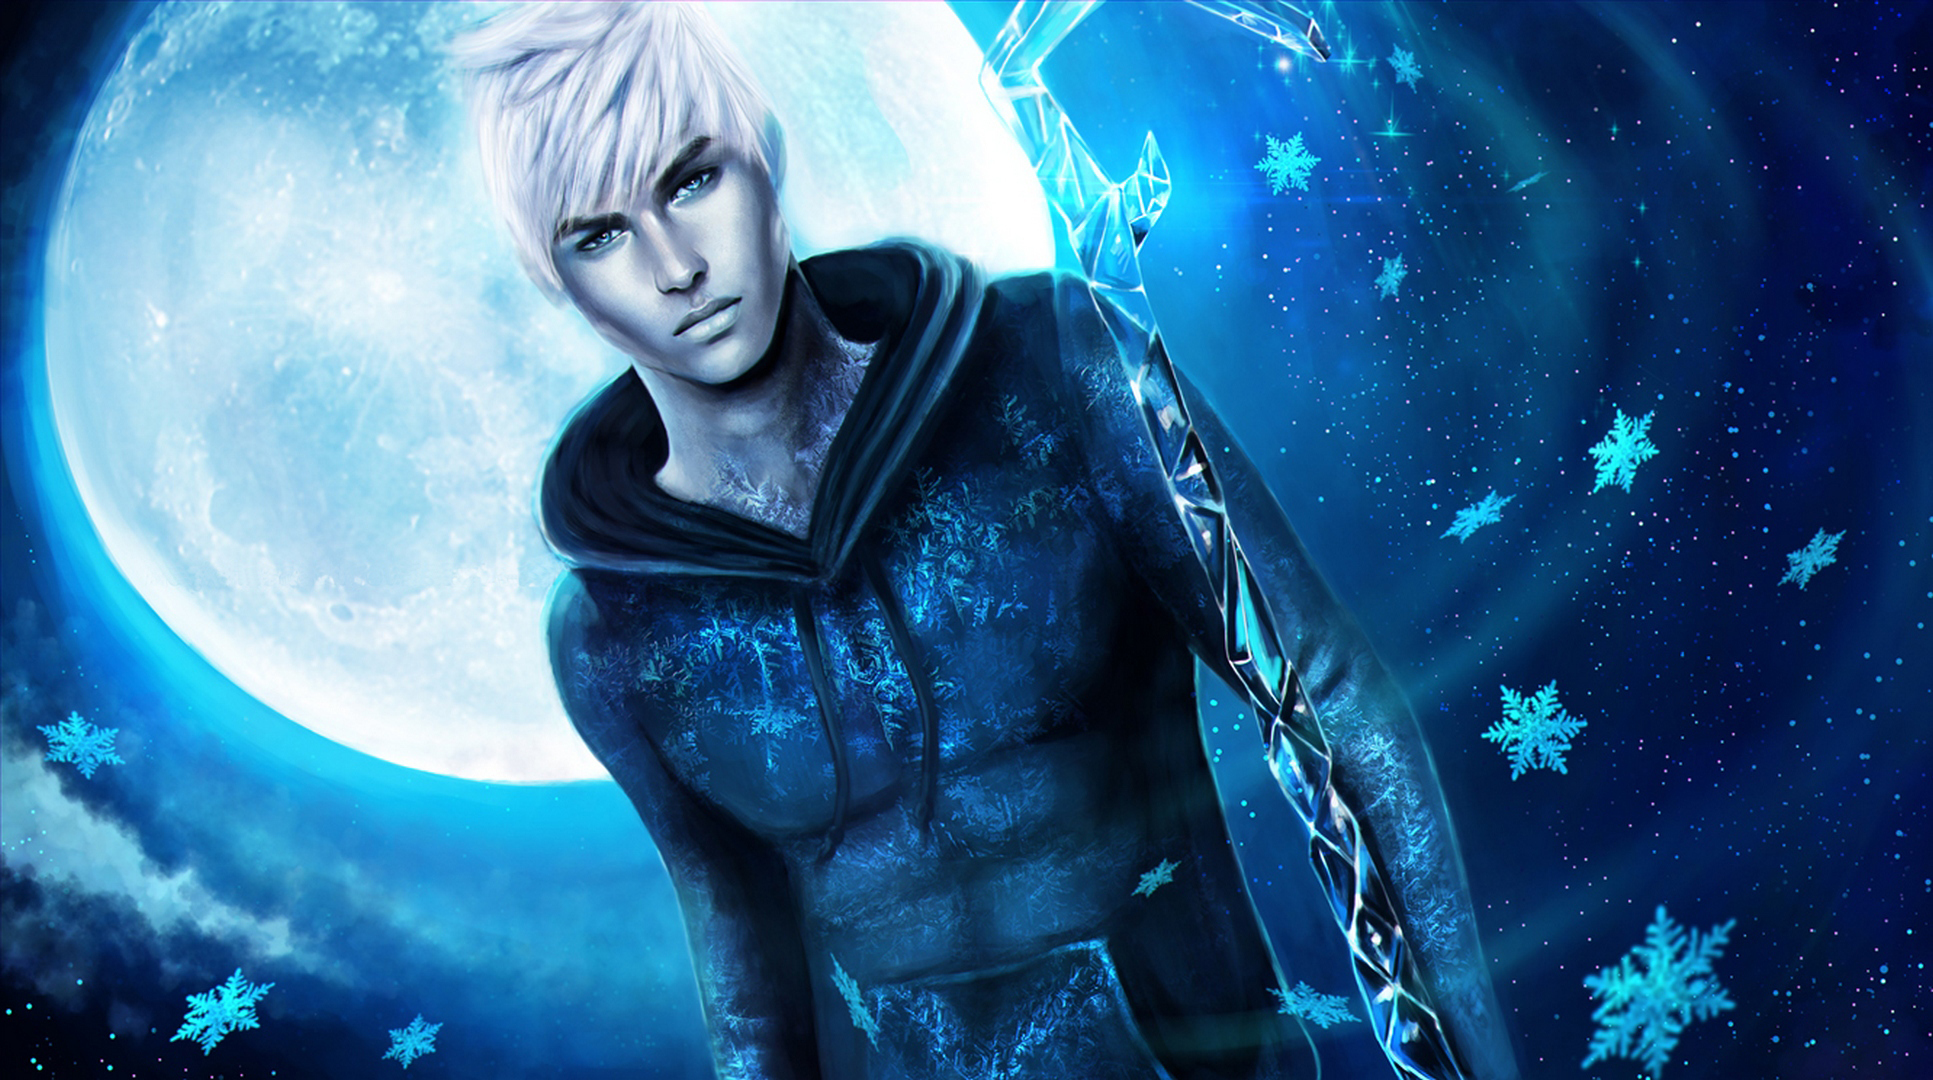 boy, winter, art, jack frost, snowflakes, ice jack, winter spirit cell phone wallpapers